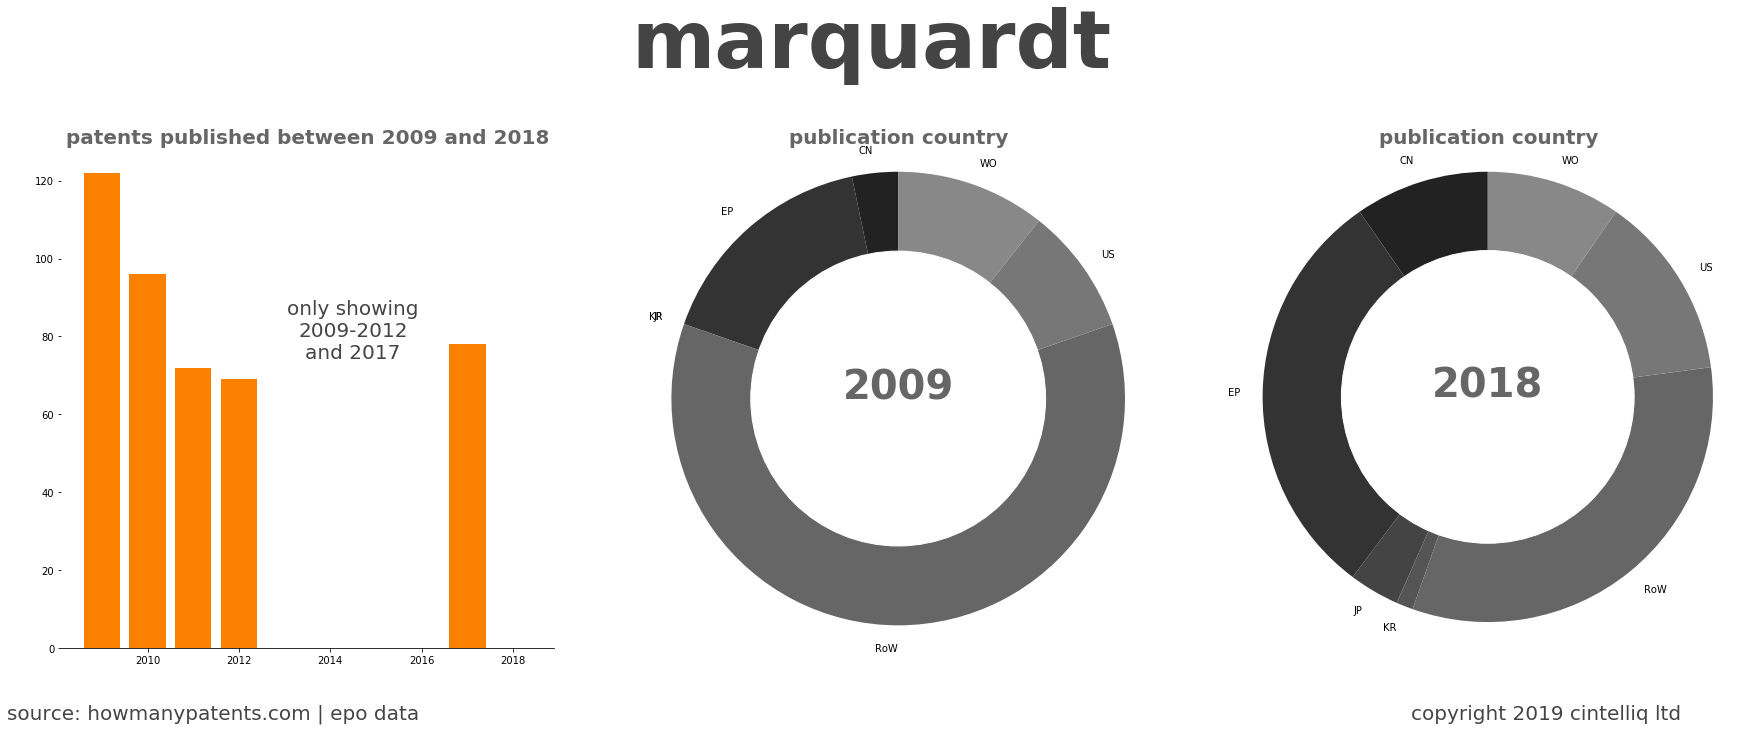 summary of patents for Marquardt